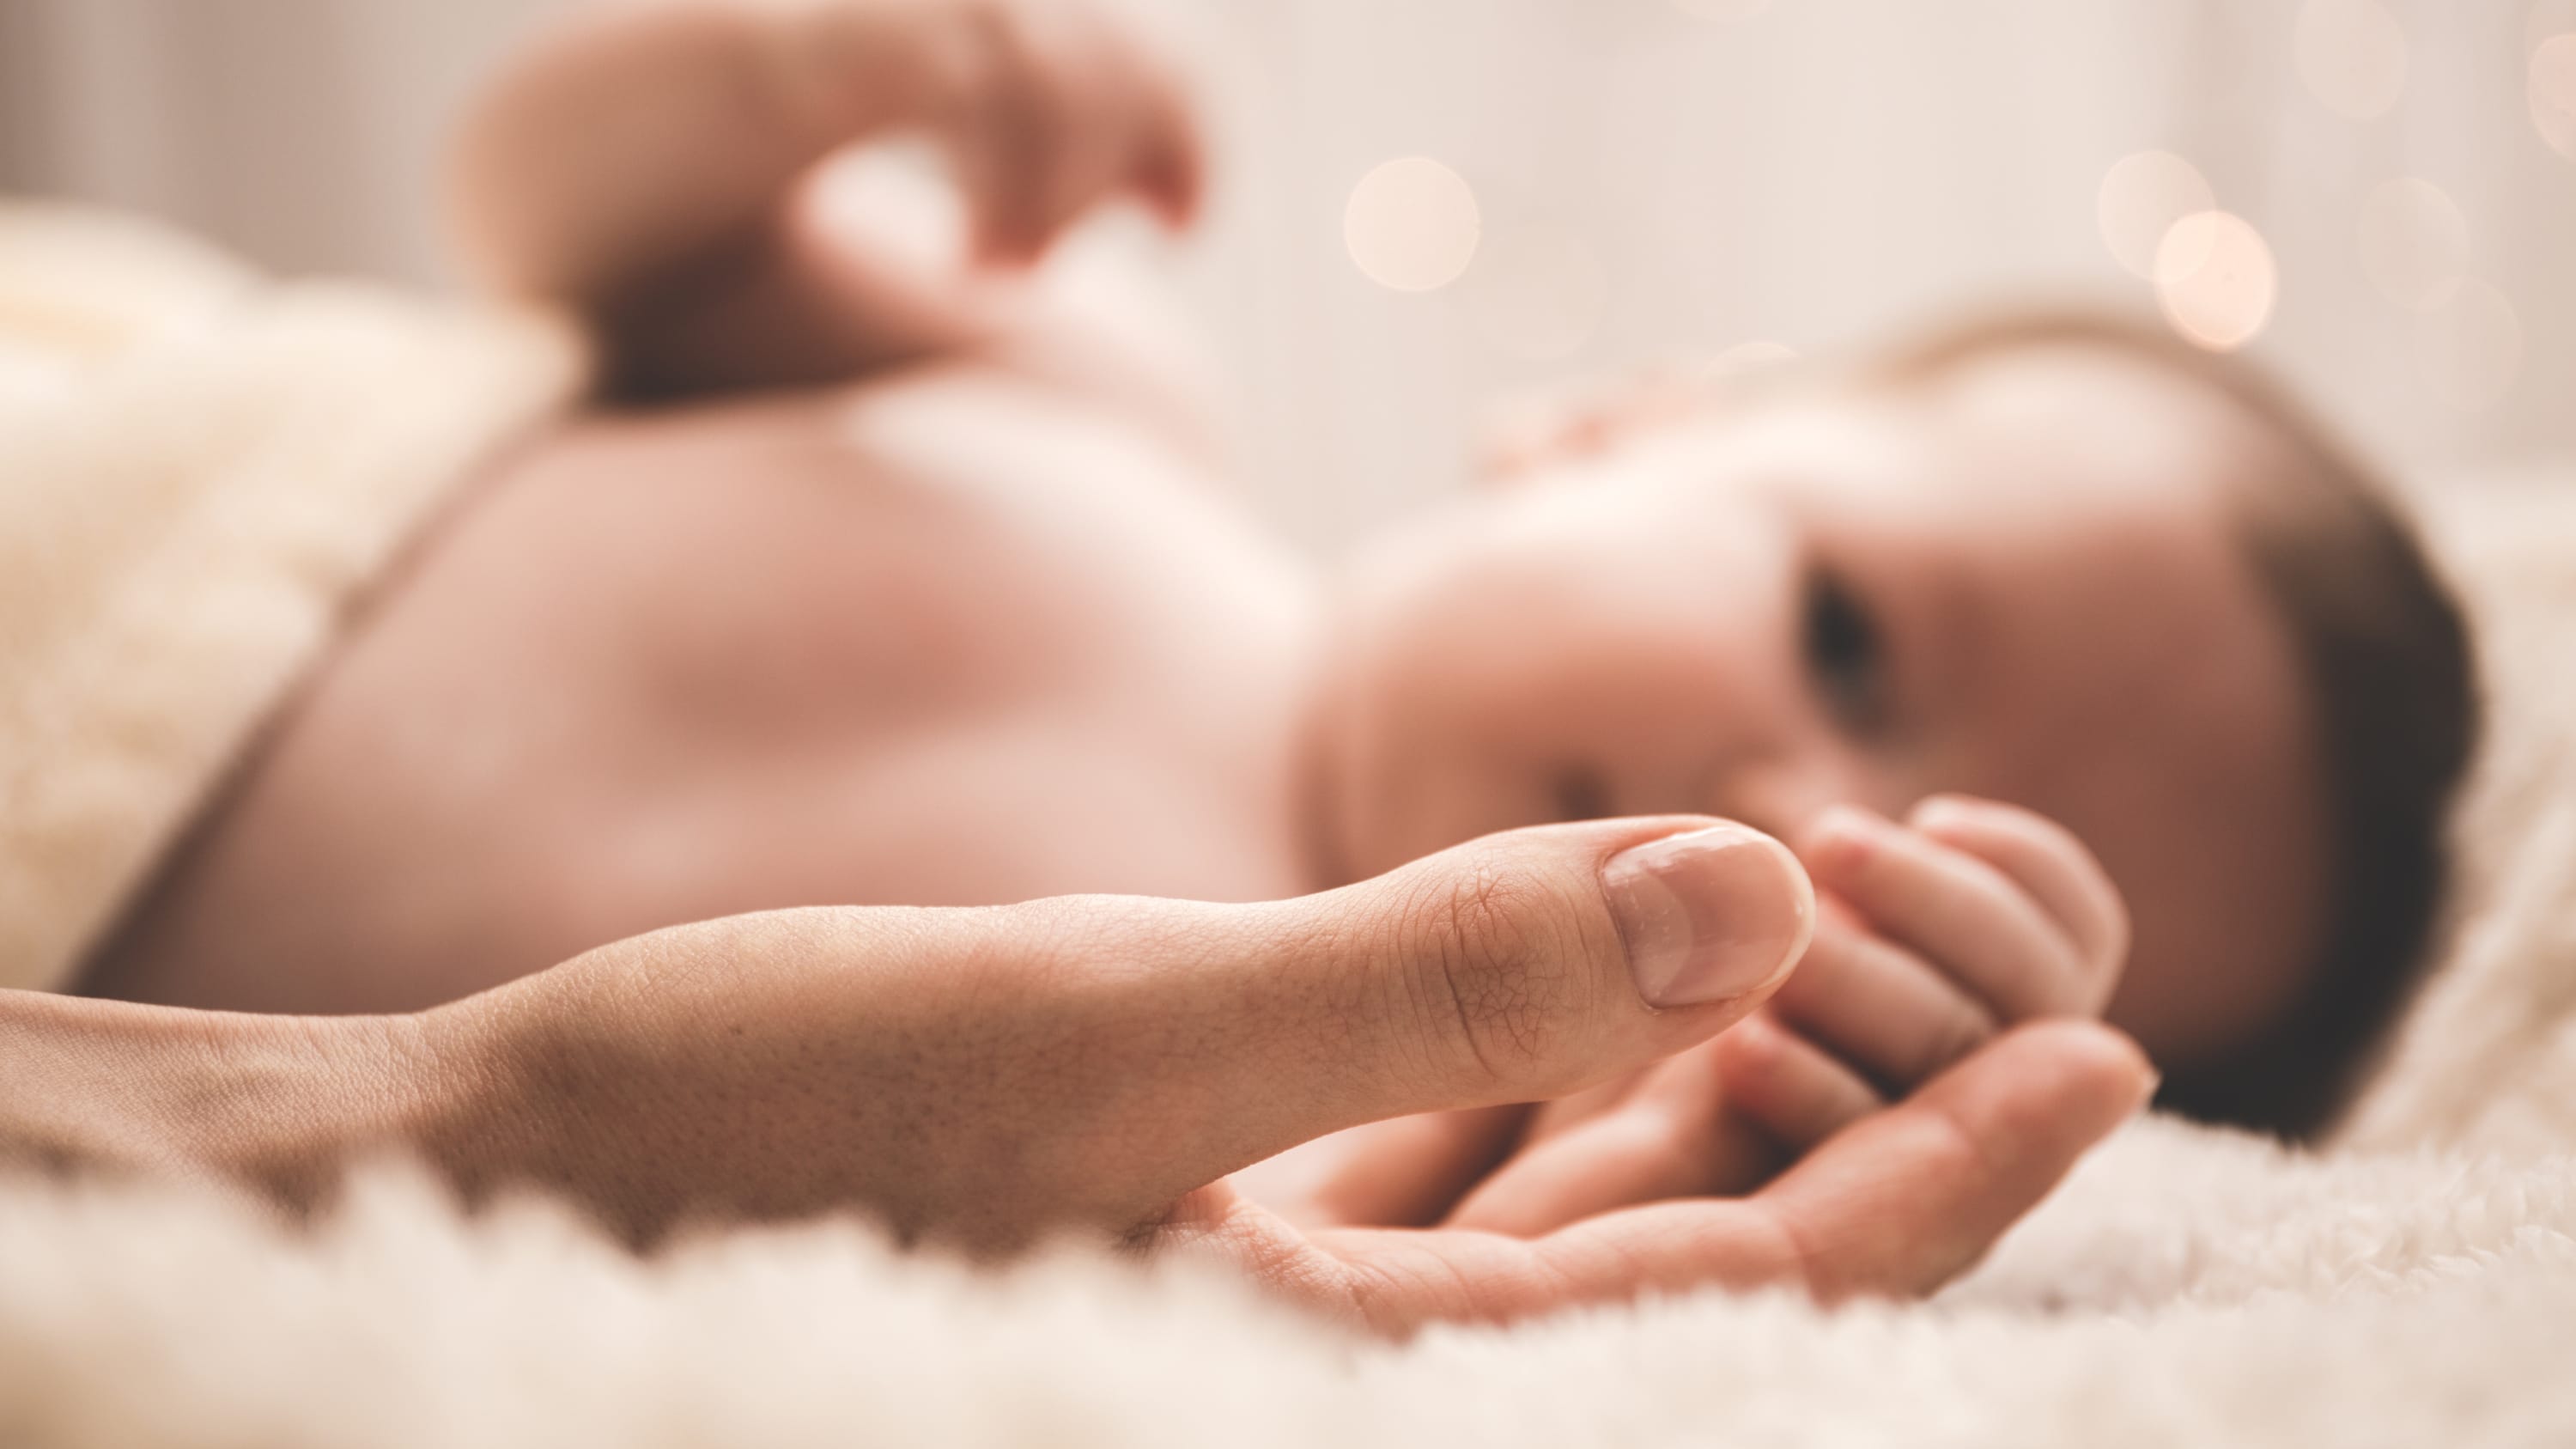 An infant that has pediatric reflux disease reaches for its mother's hand